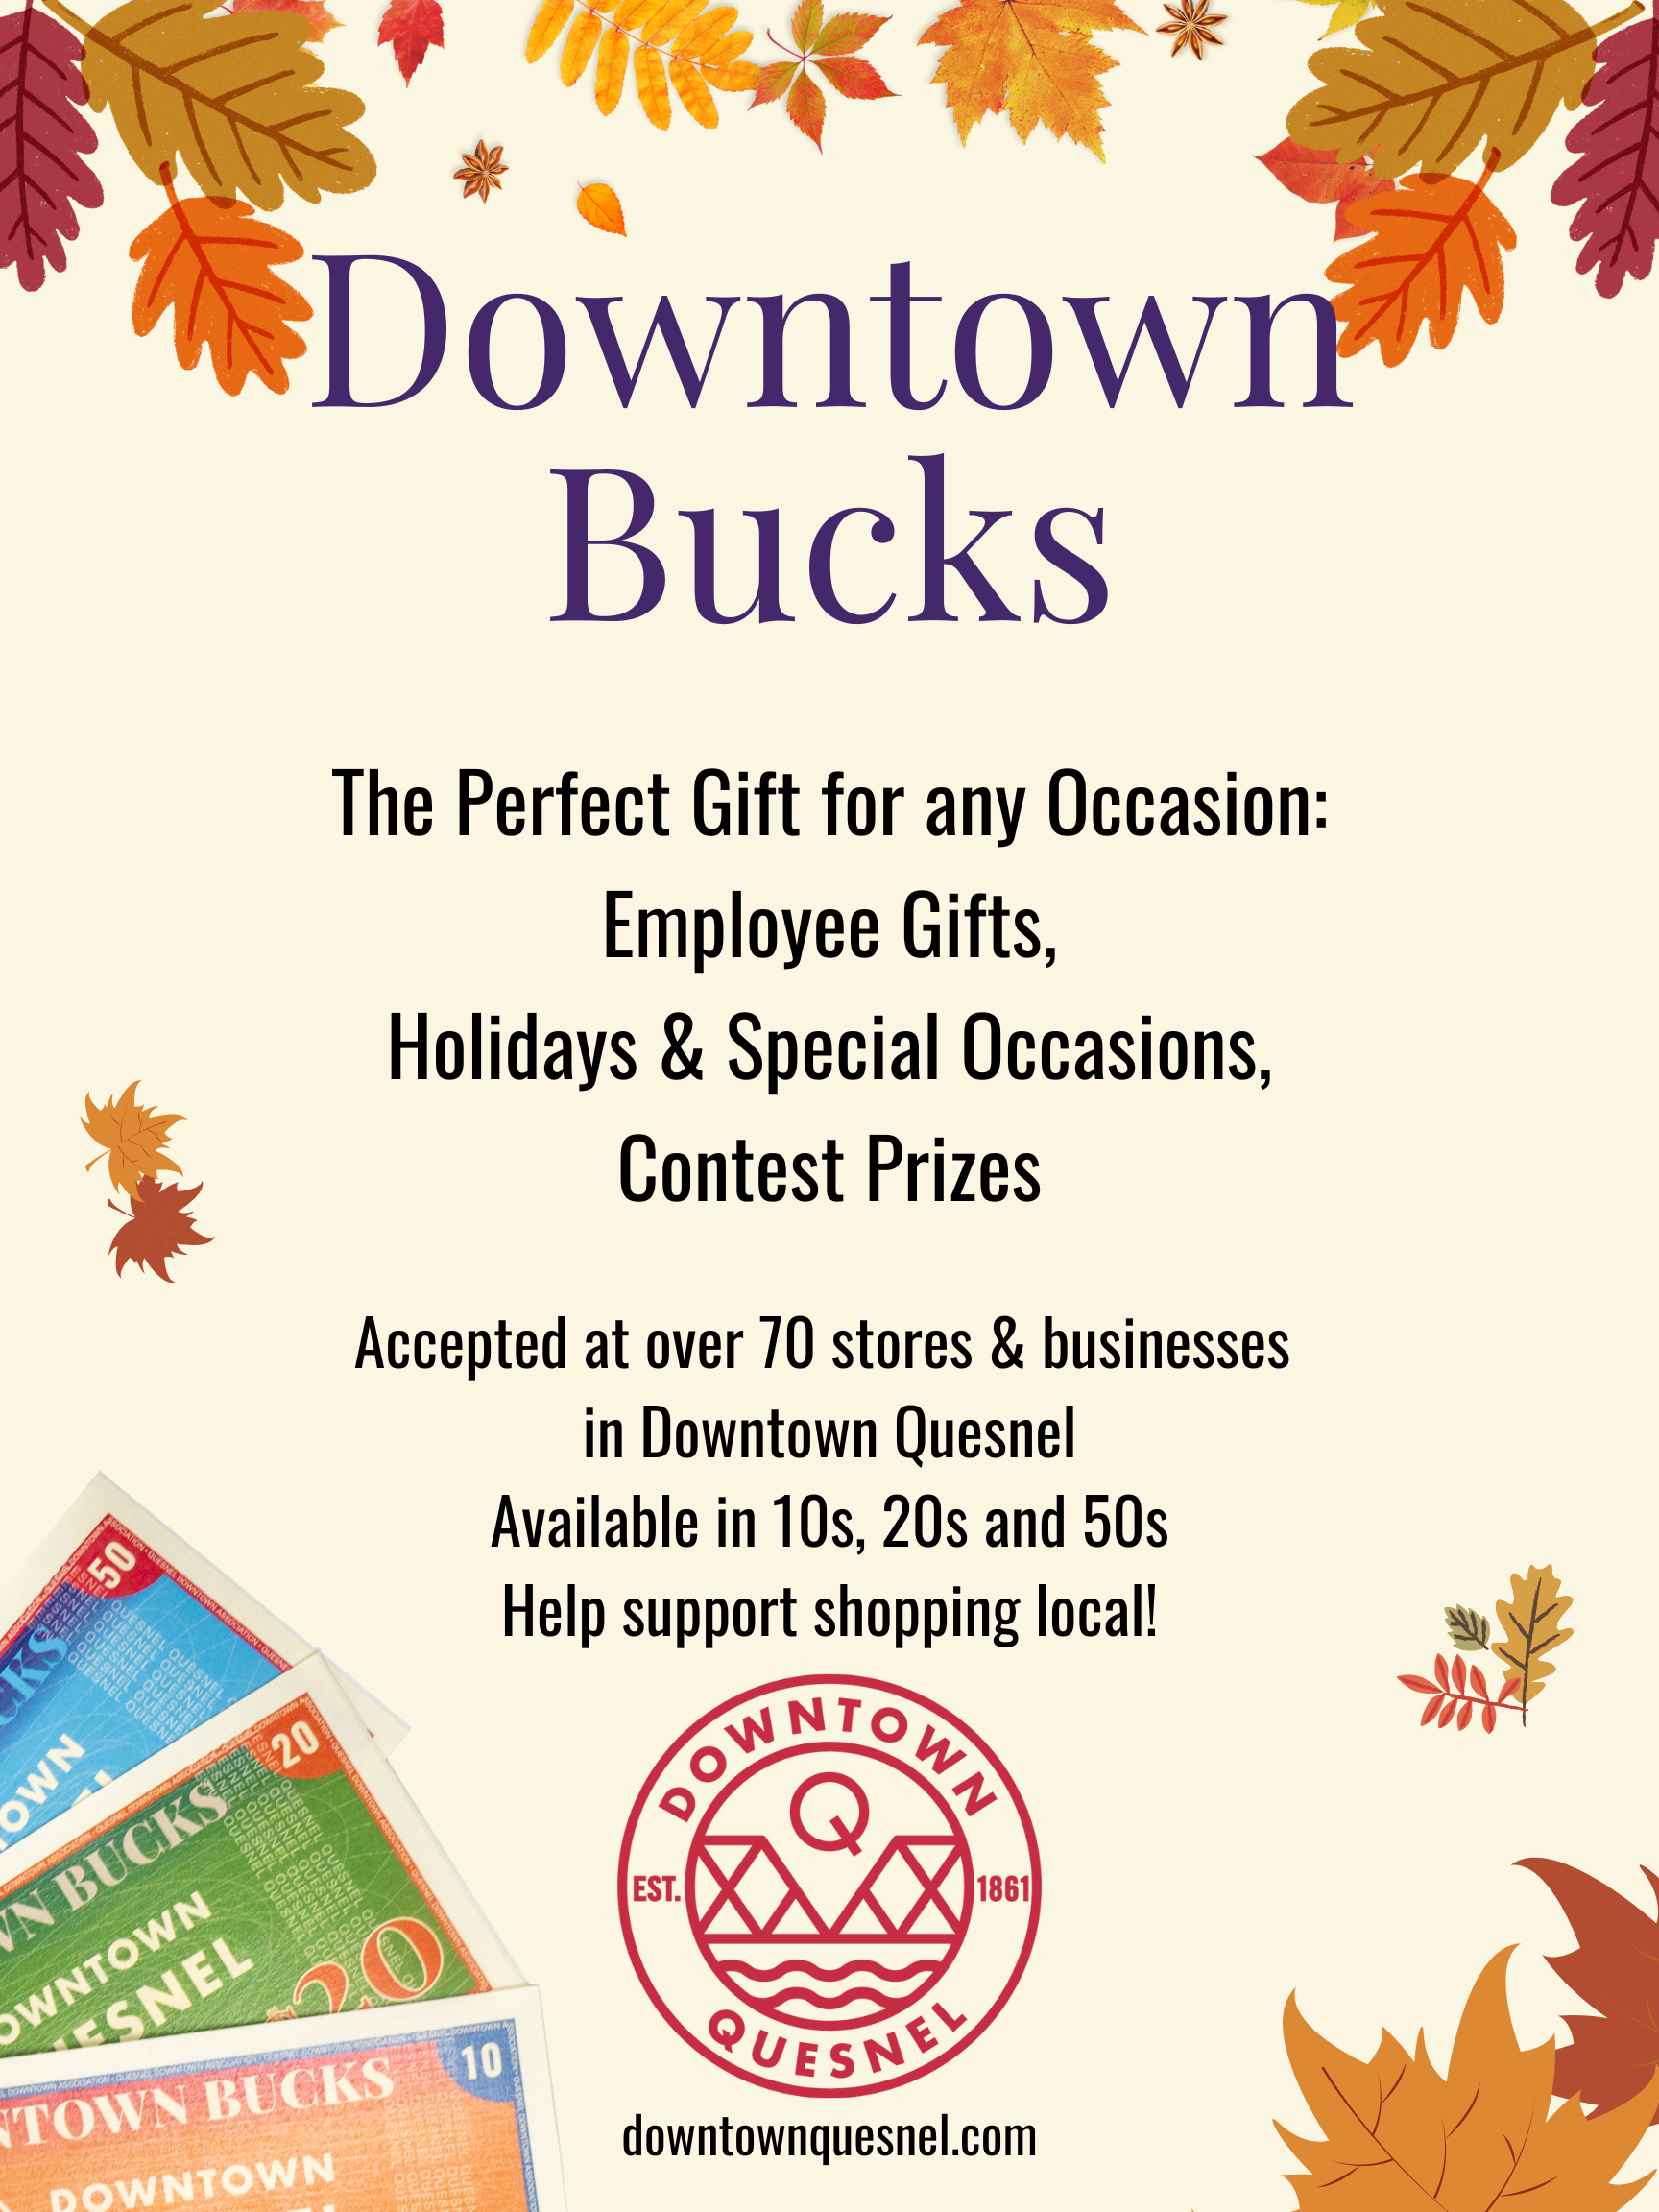 Downtown Bucks Holiday Gifts